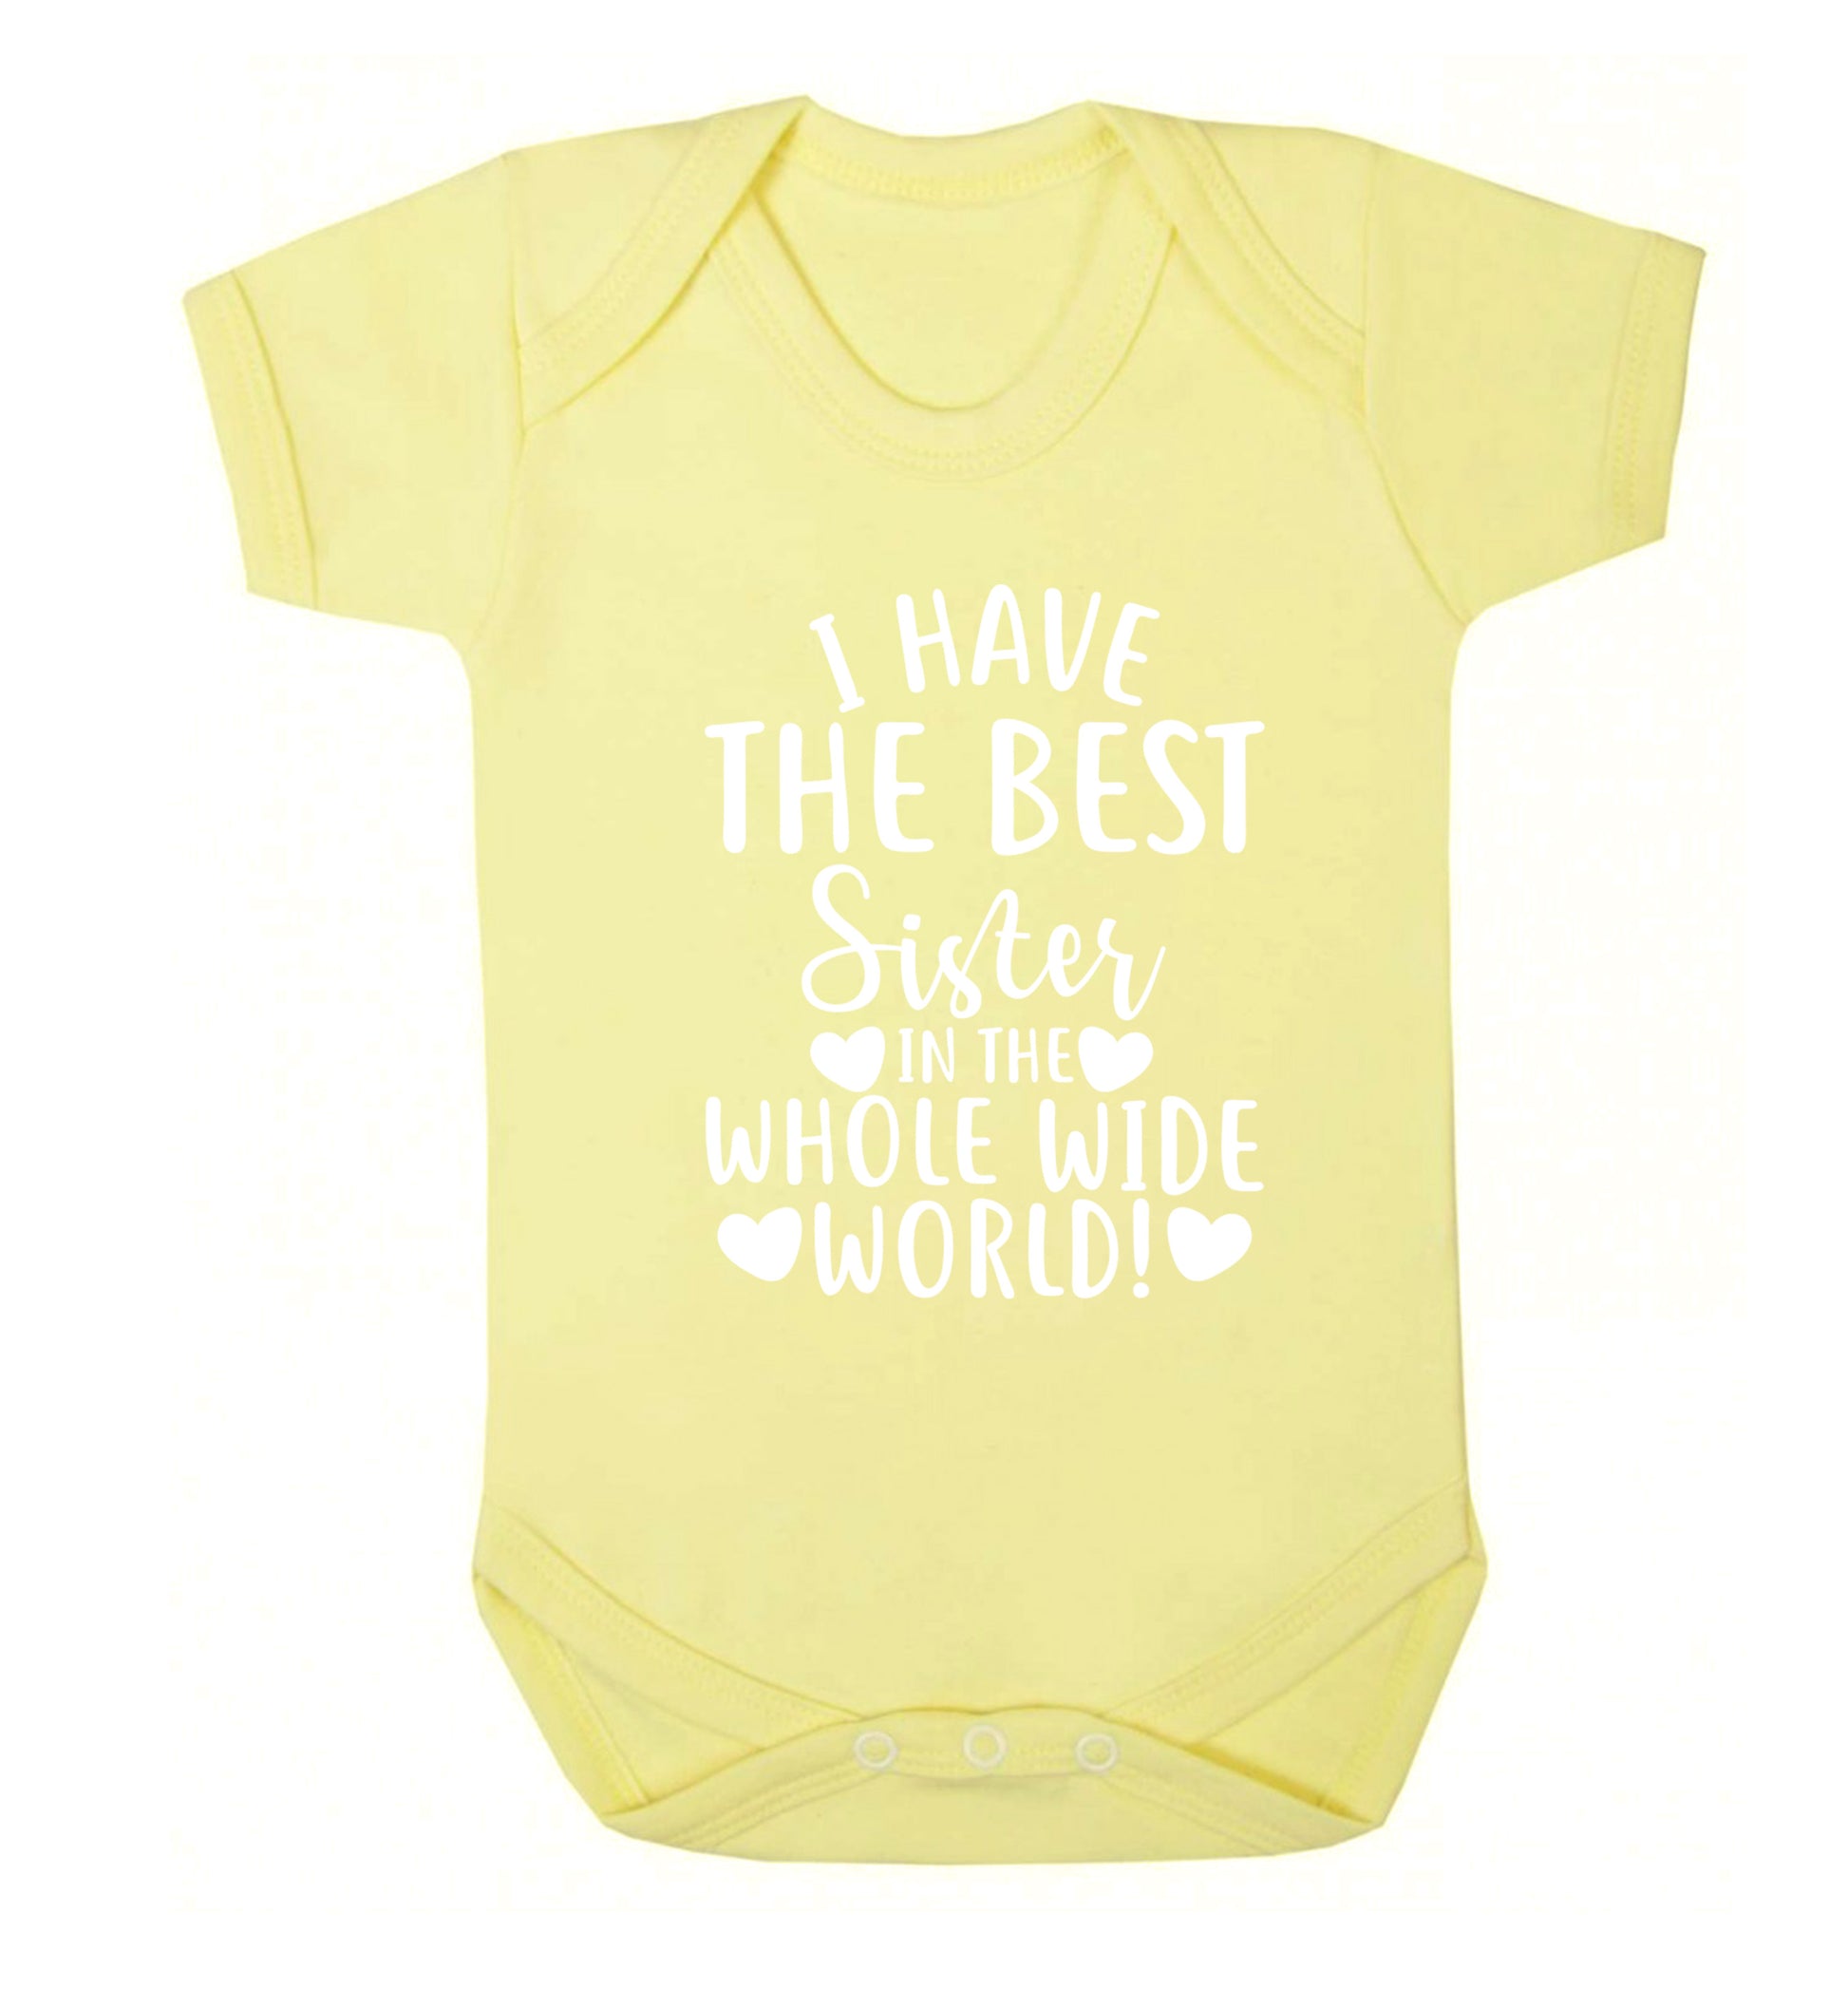 I have the best sister in the whole wide world! Baby Vest pale yellow 18-24 months